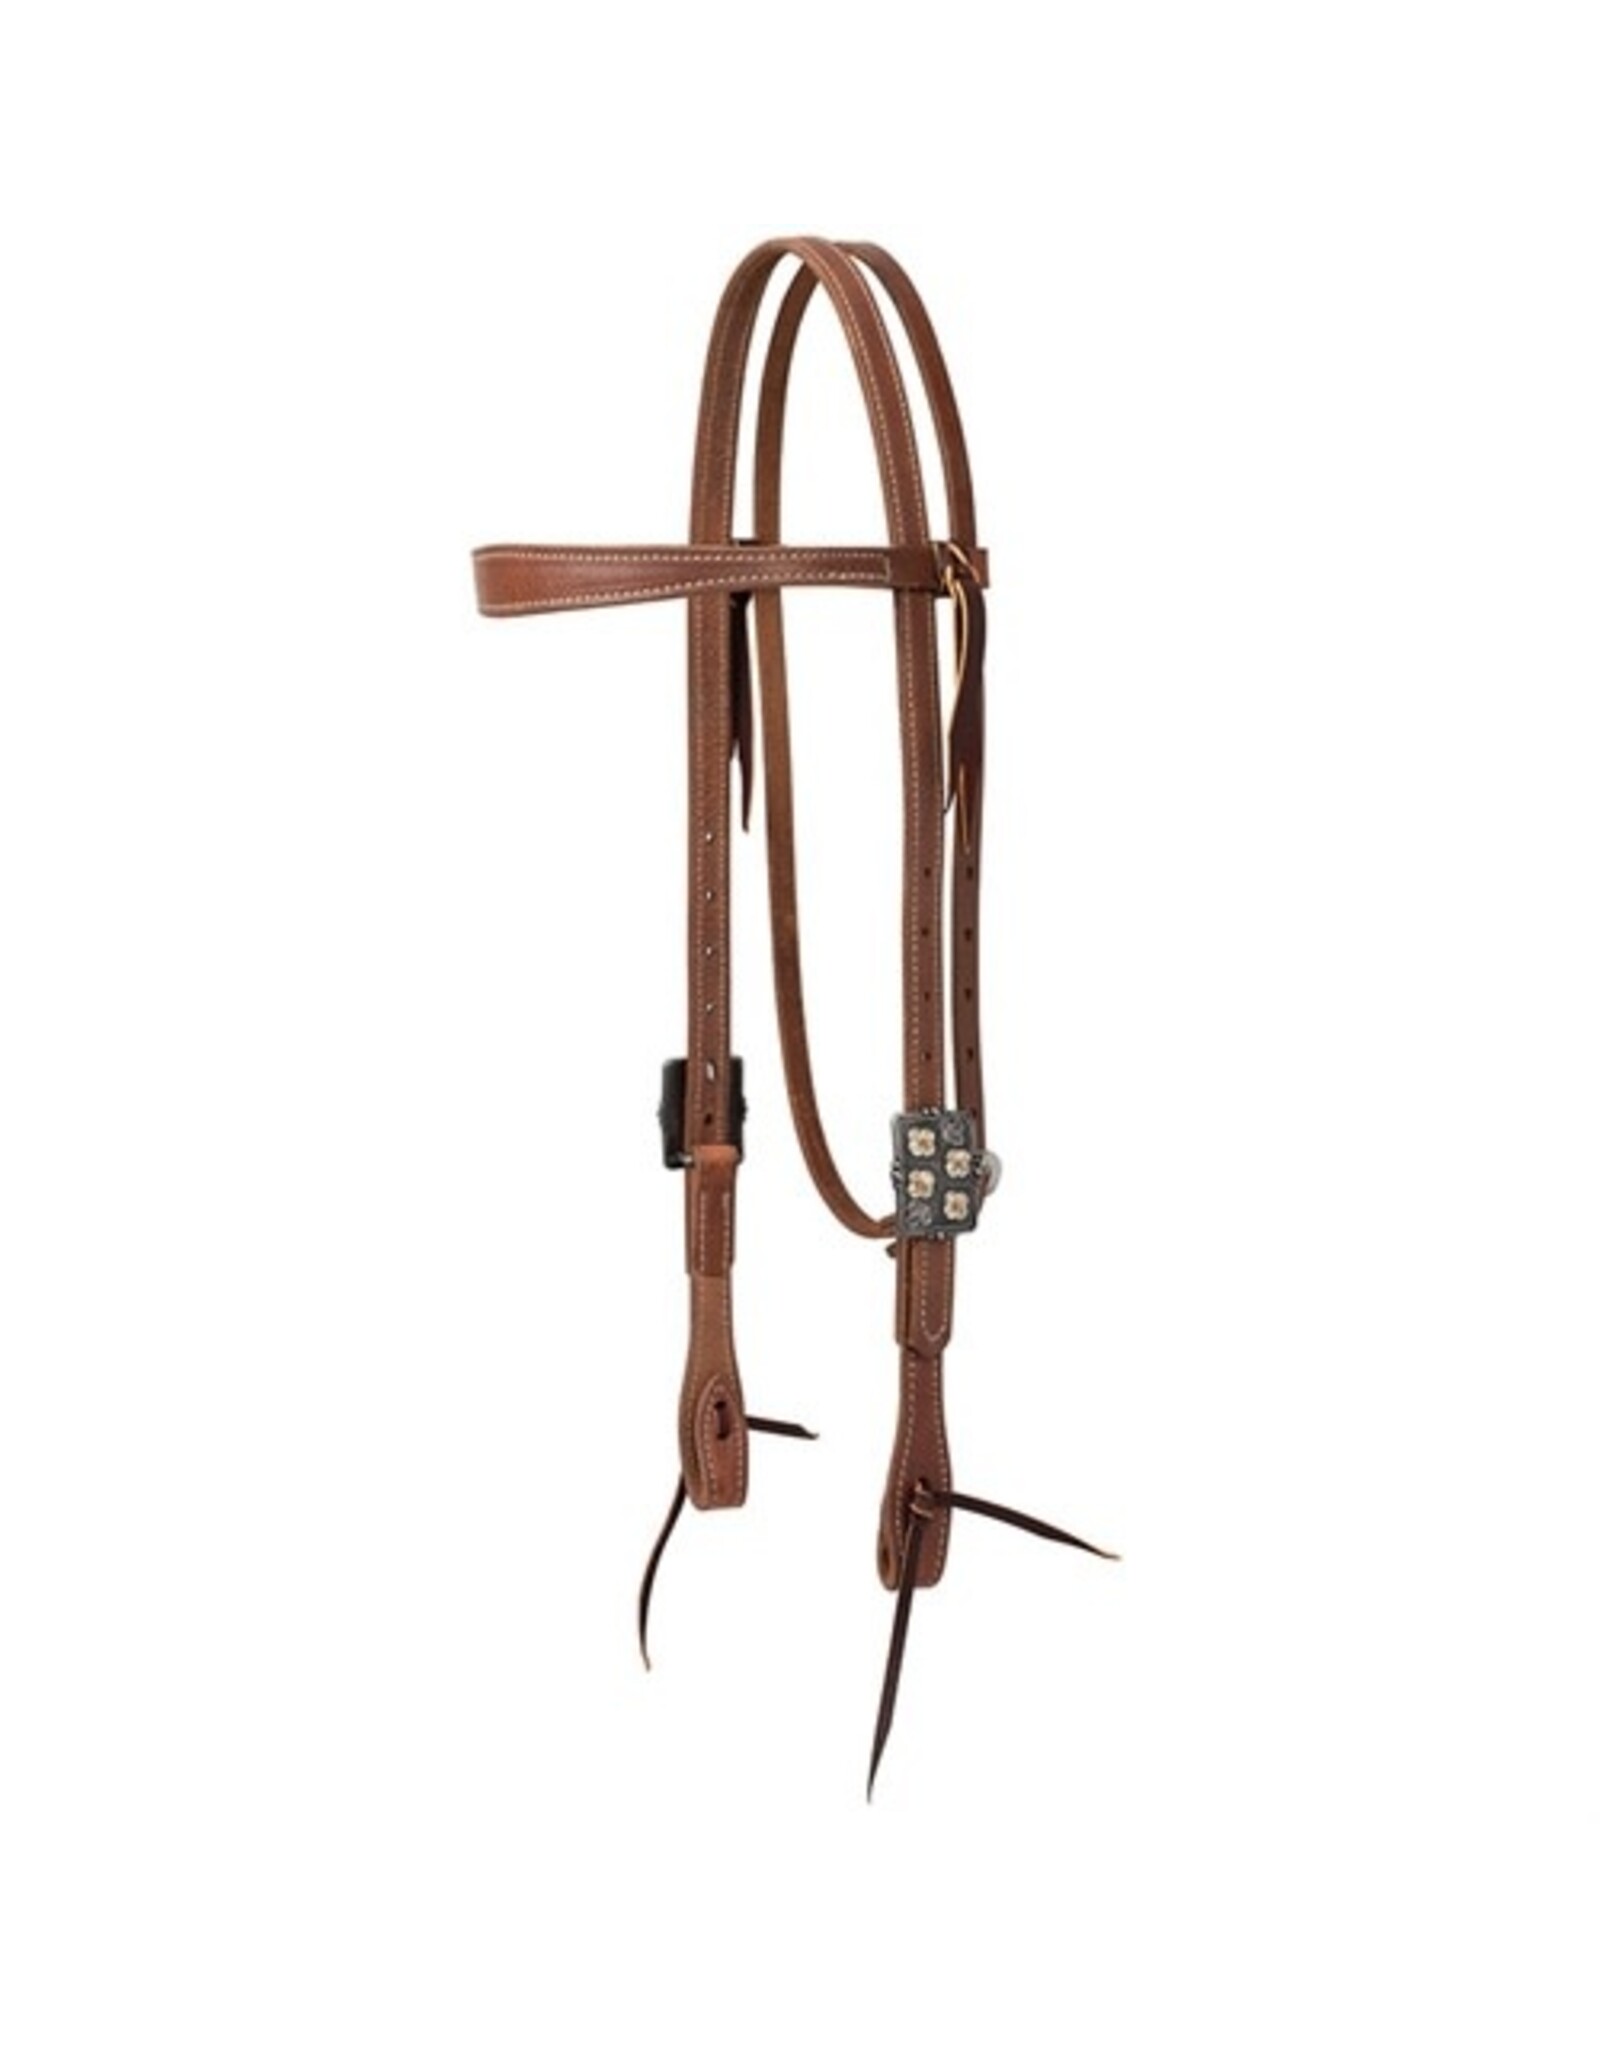 Weaver Premium Harness Leather Browband Headstall W/ Silver Floral Concho 10036-03-17